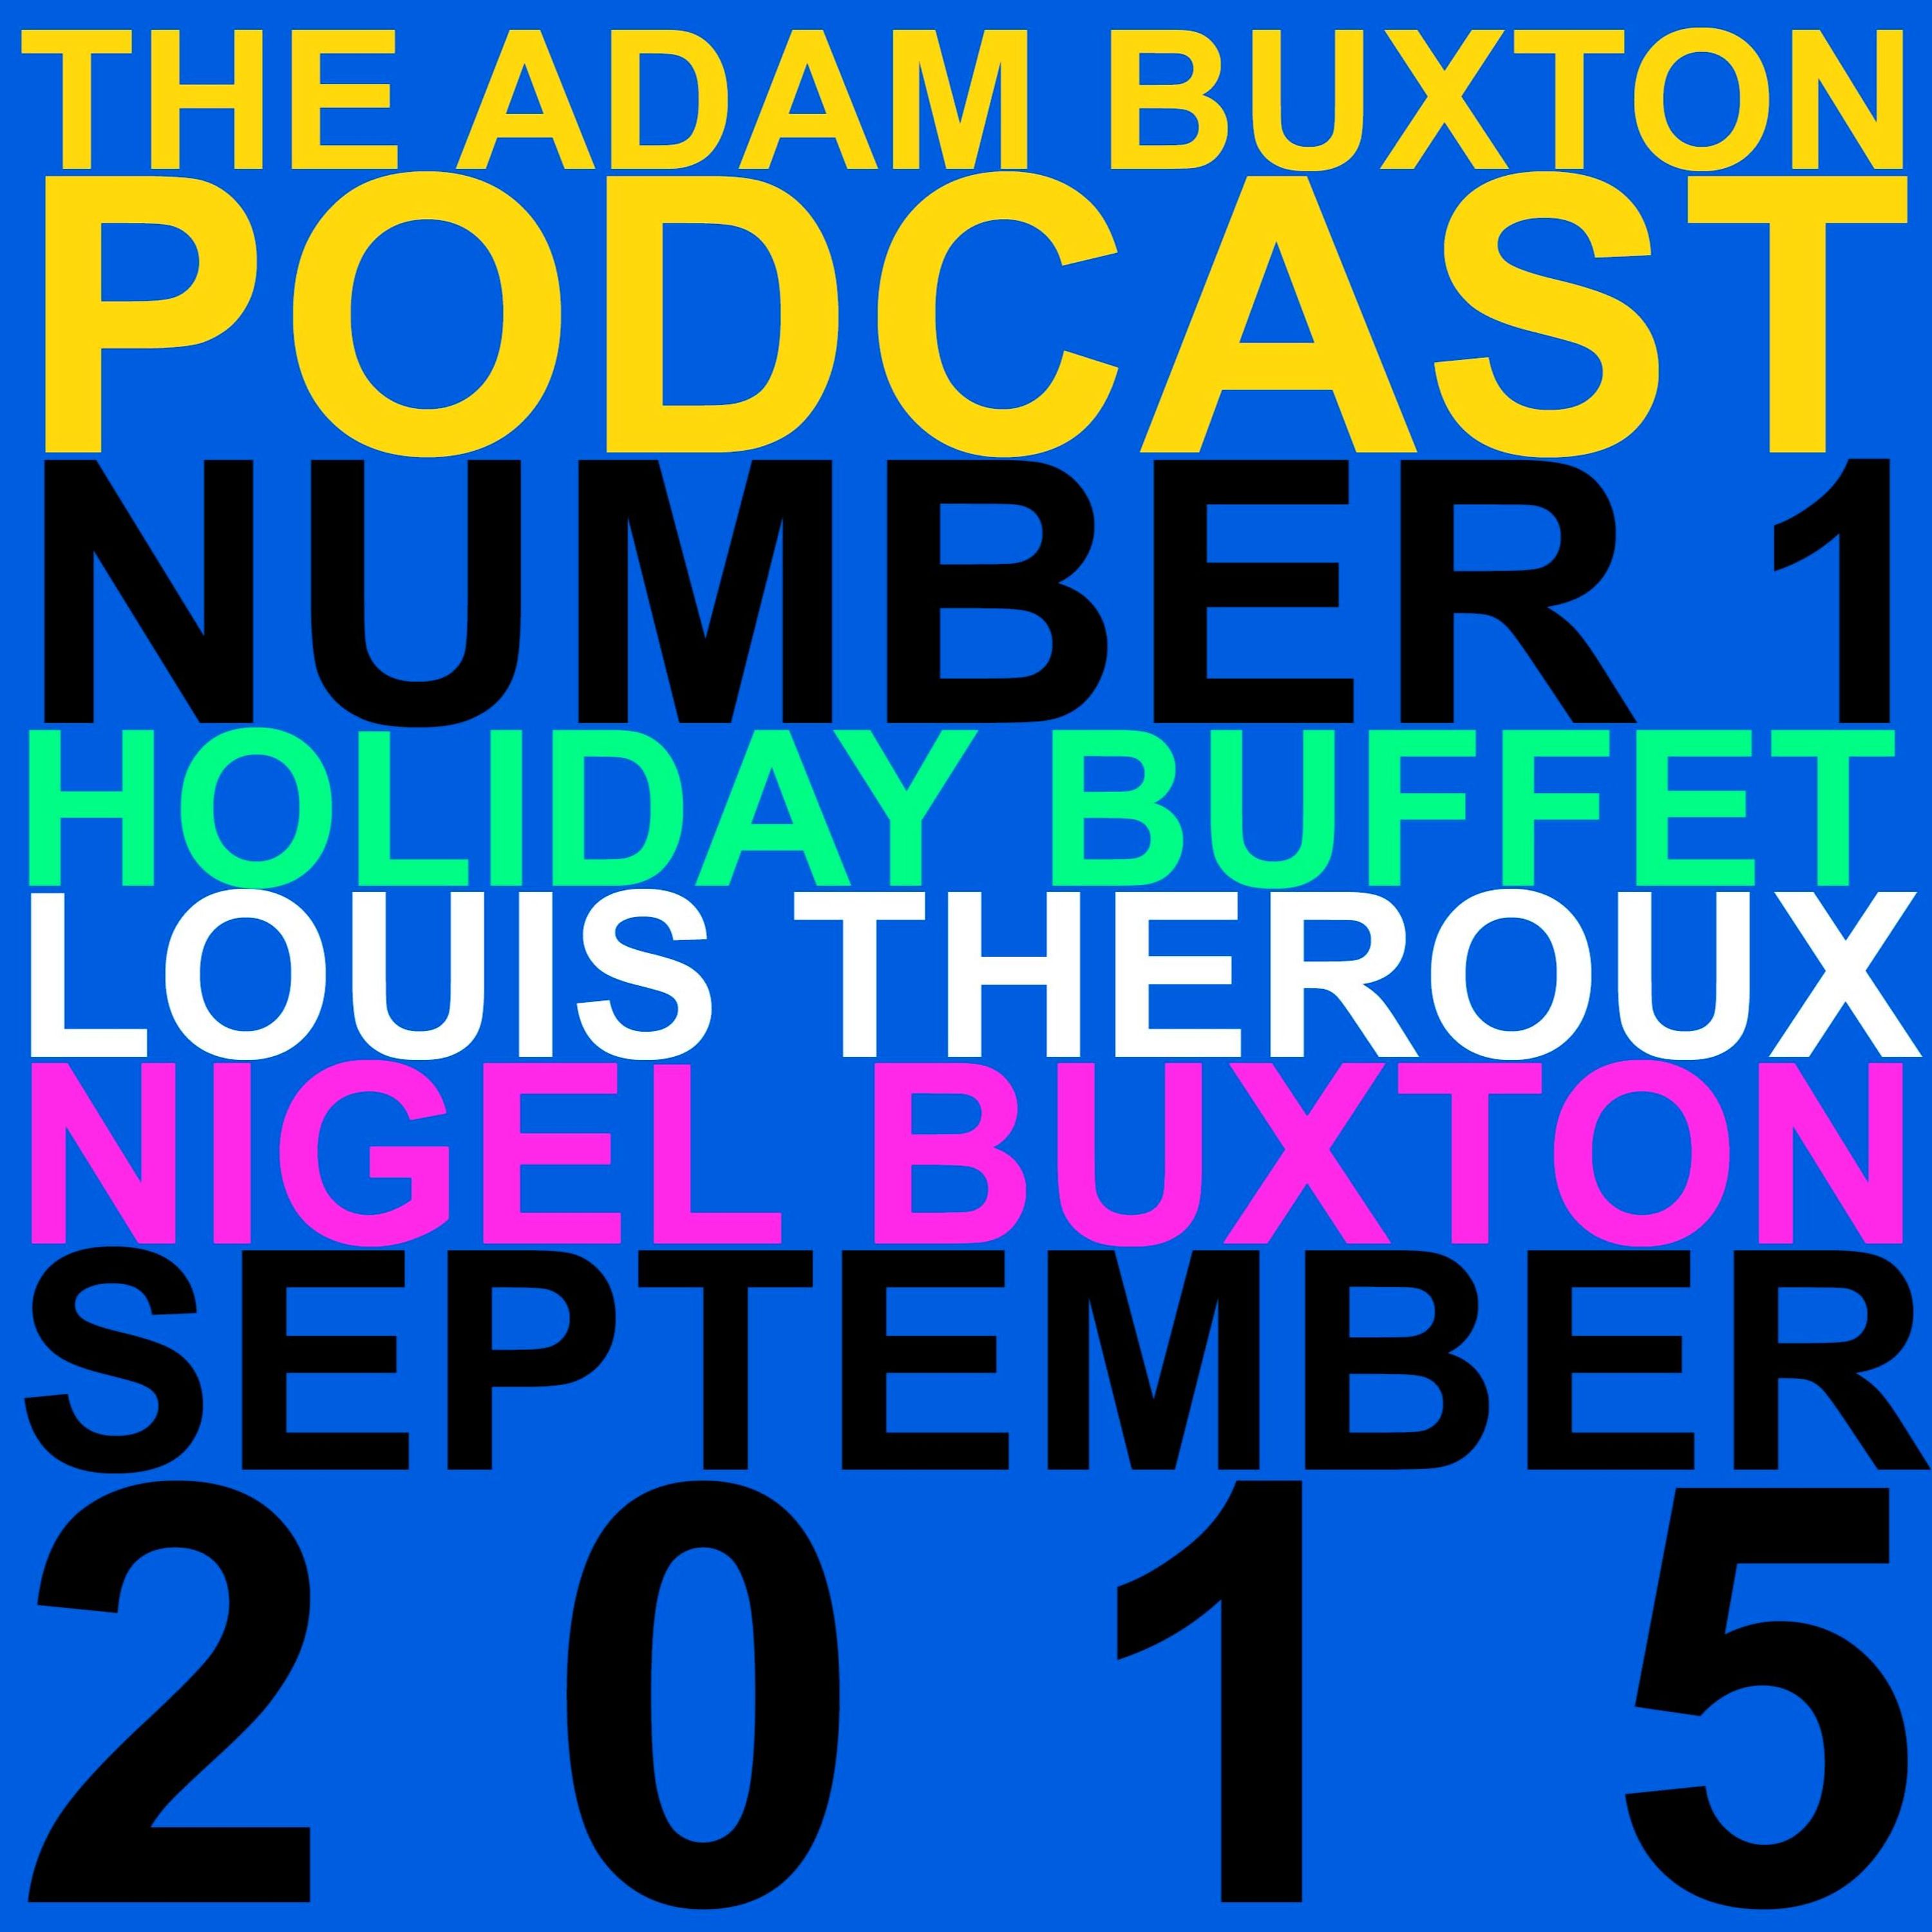 EP.1 - ’HOLIDAY BUFFET’ WITH LOUIS THEROUX